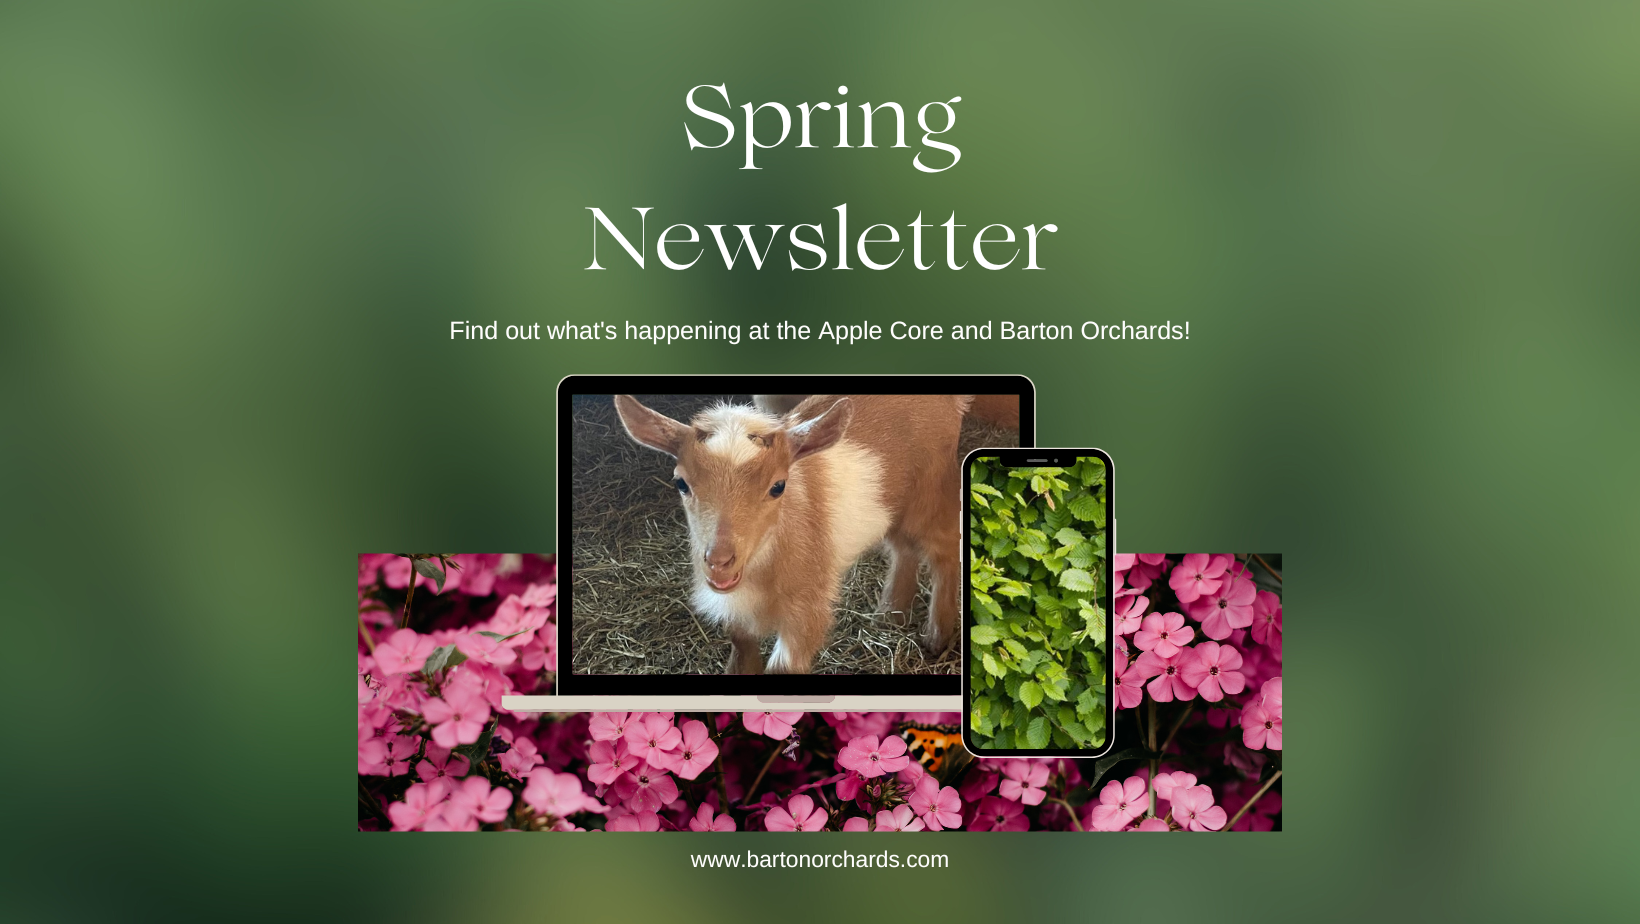 Barton Orchards Spring Newsletter - Sign up now